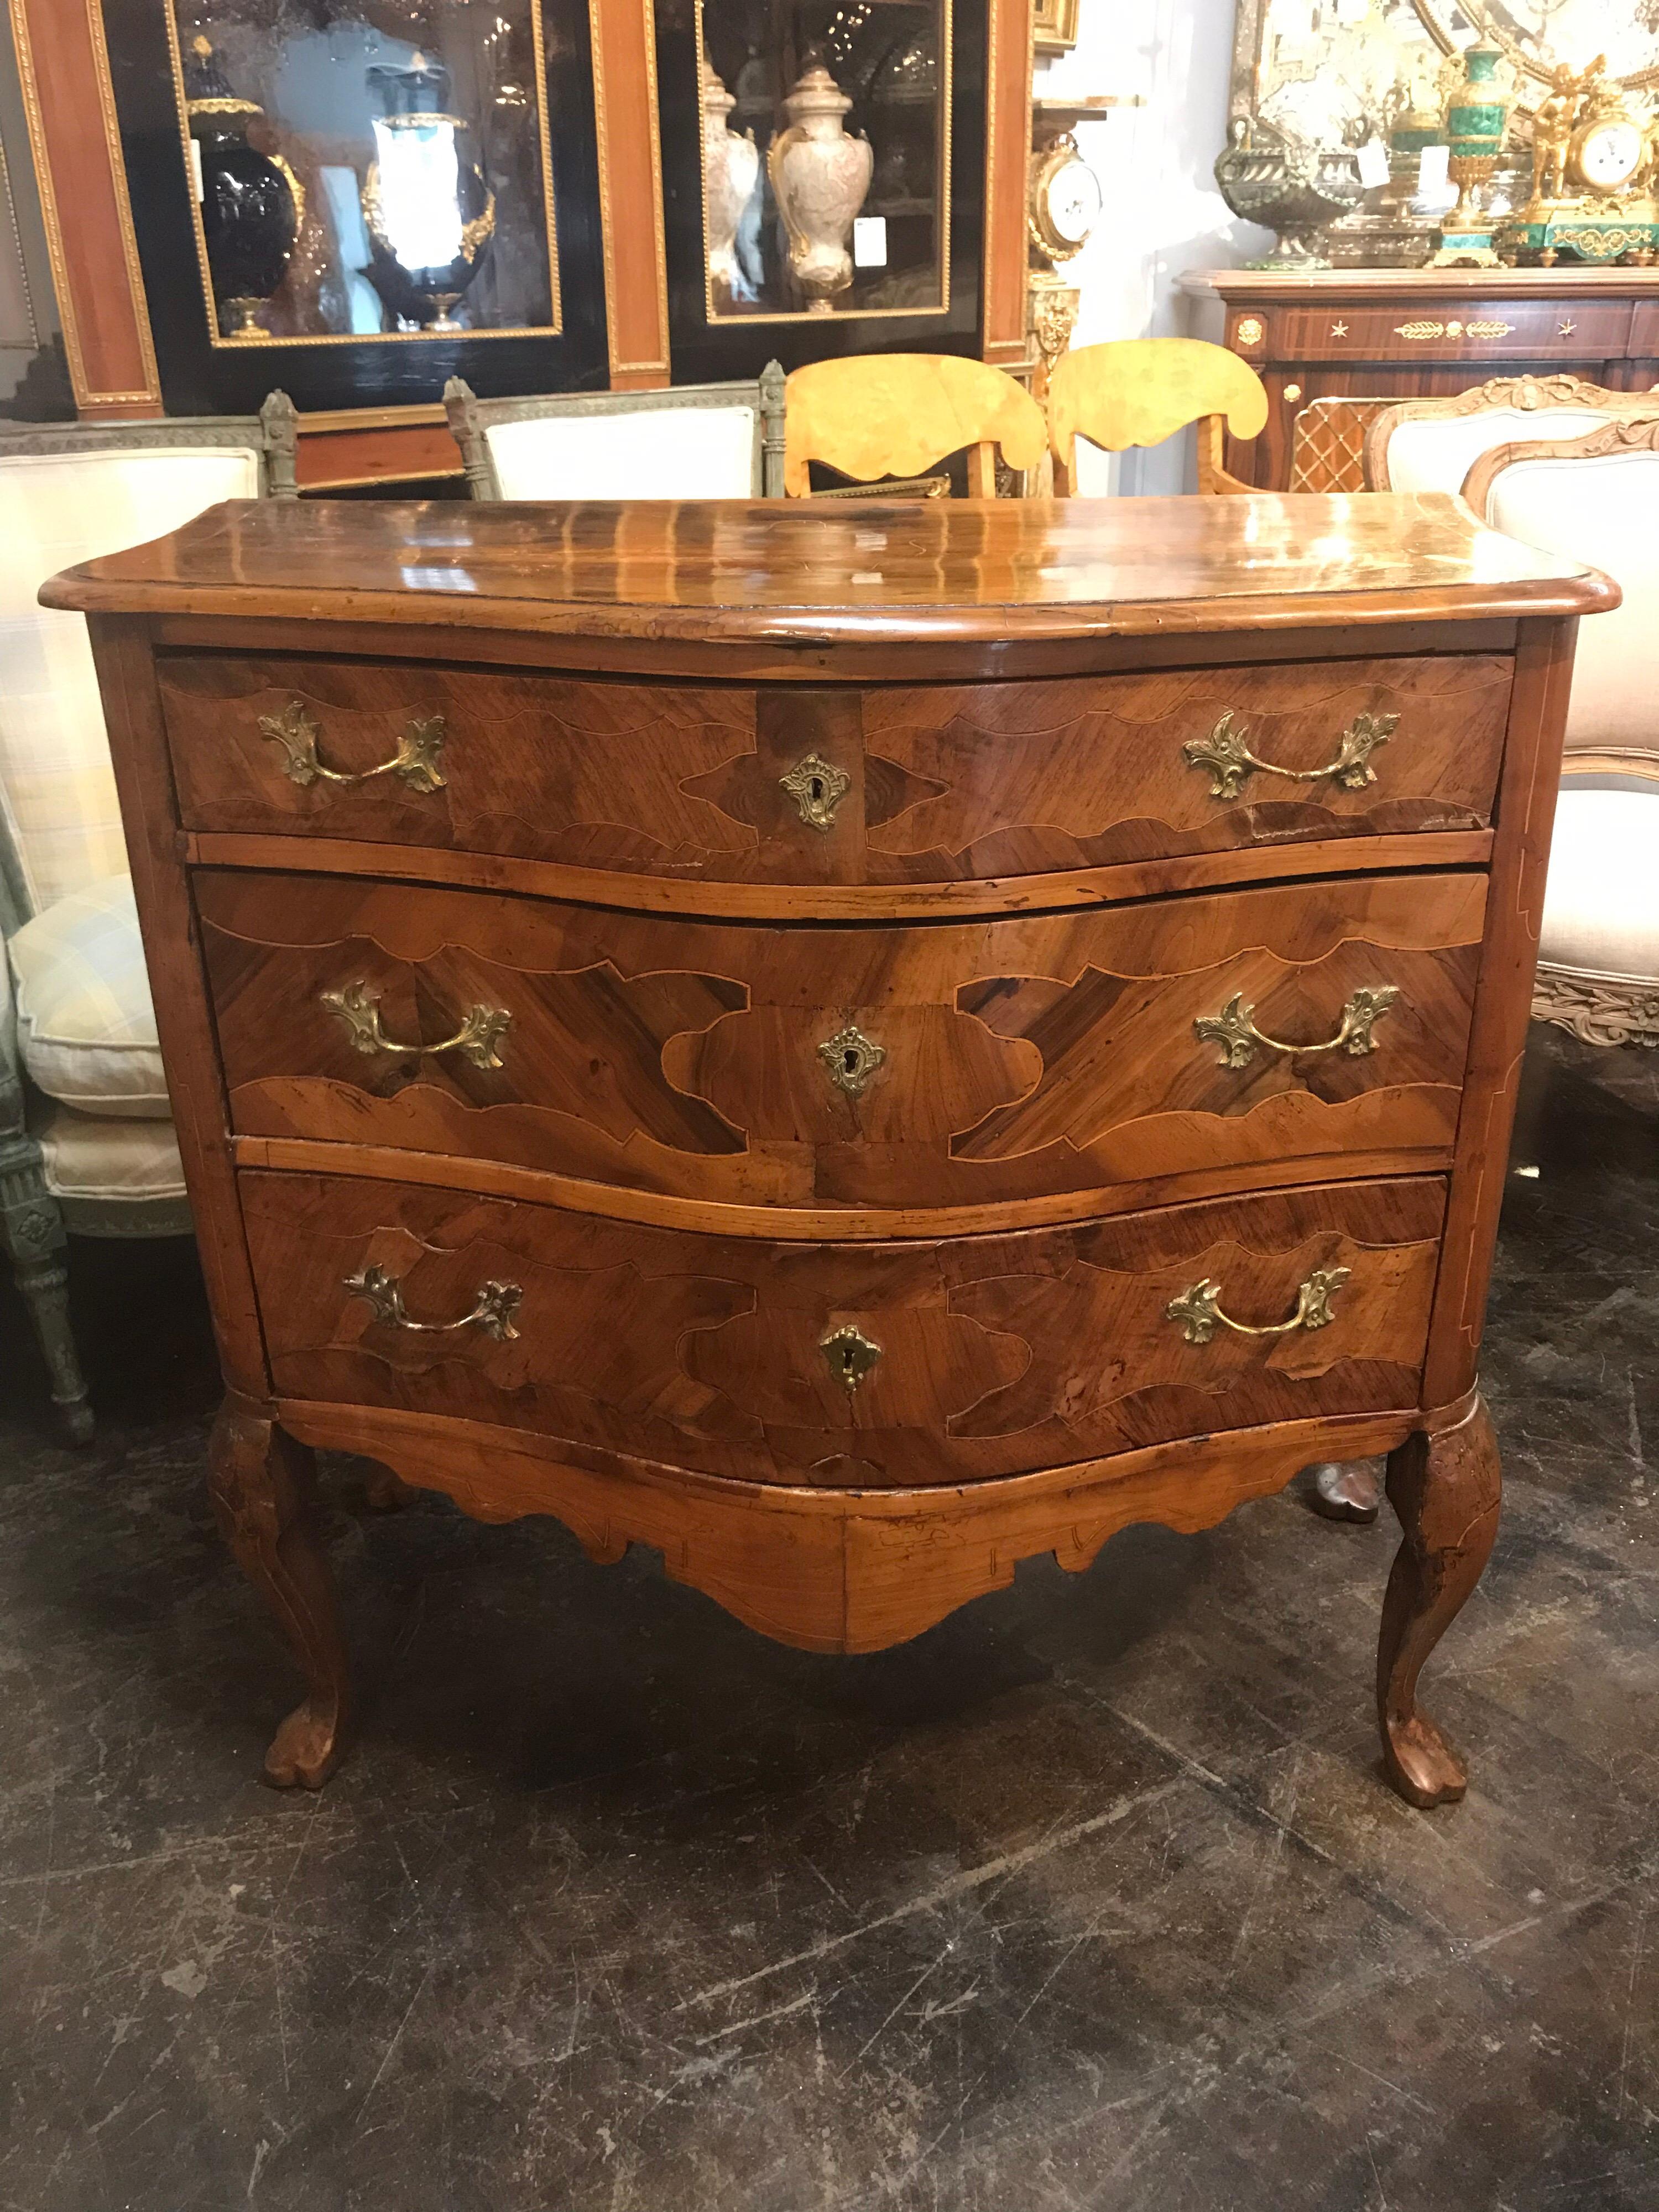 Handsome 18th century Italian inlaid walnut commode. Having 2 drawers raised above 2 curved legs. Very well made with rich old patina and charm. Extremely well priced for an 18th century piece!